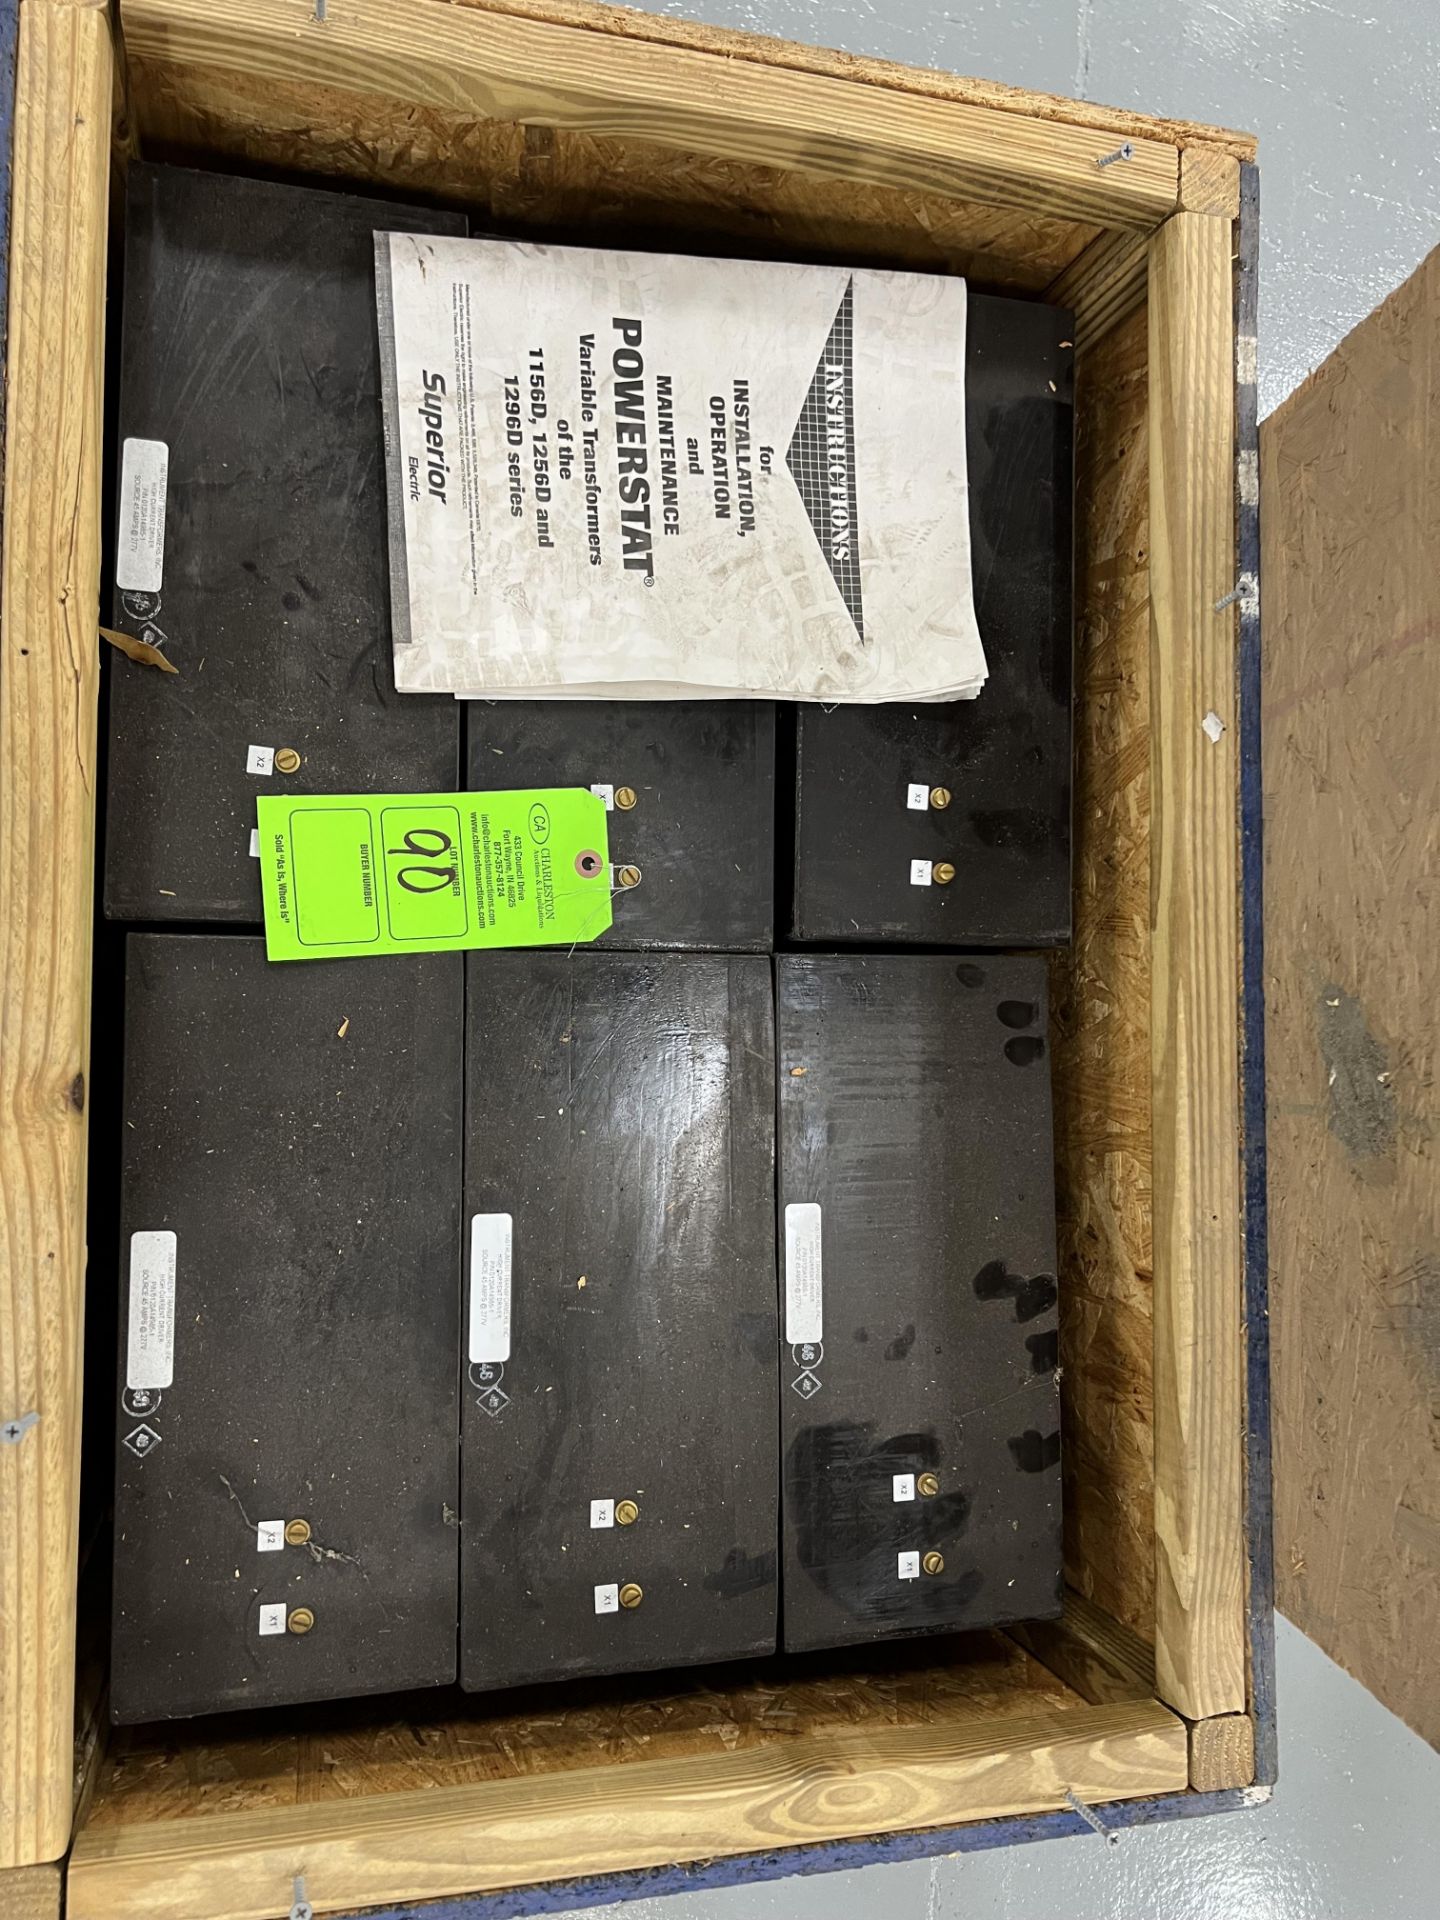 (6) VARIABLE TRANSFORMERS HIGH CURRENT DRIVER; M# 0120A14985-1; SOURCE 45 AMPS; 277 V